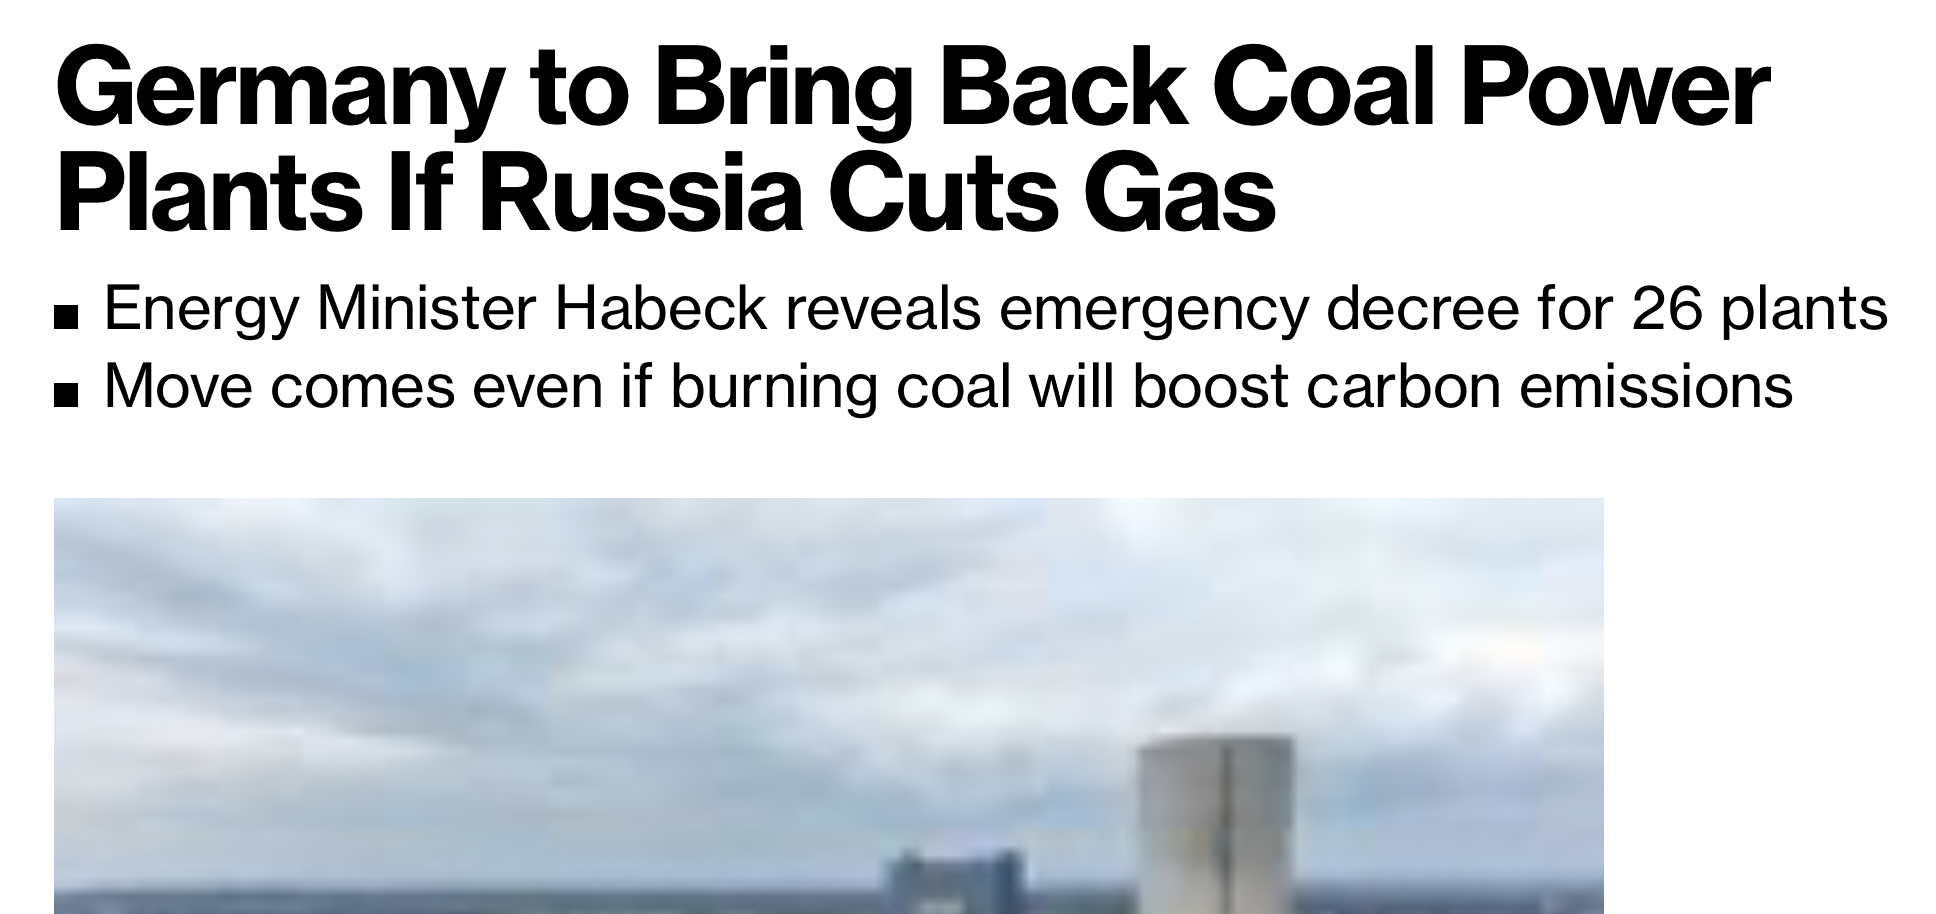 Germany to Bring Back Coal Power Plants If Russia Cuts Gas.png